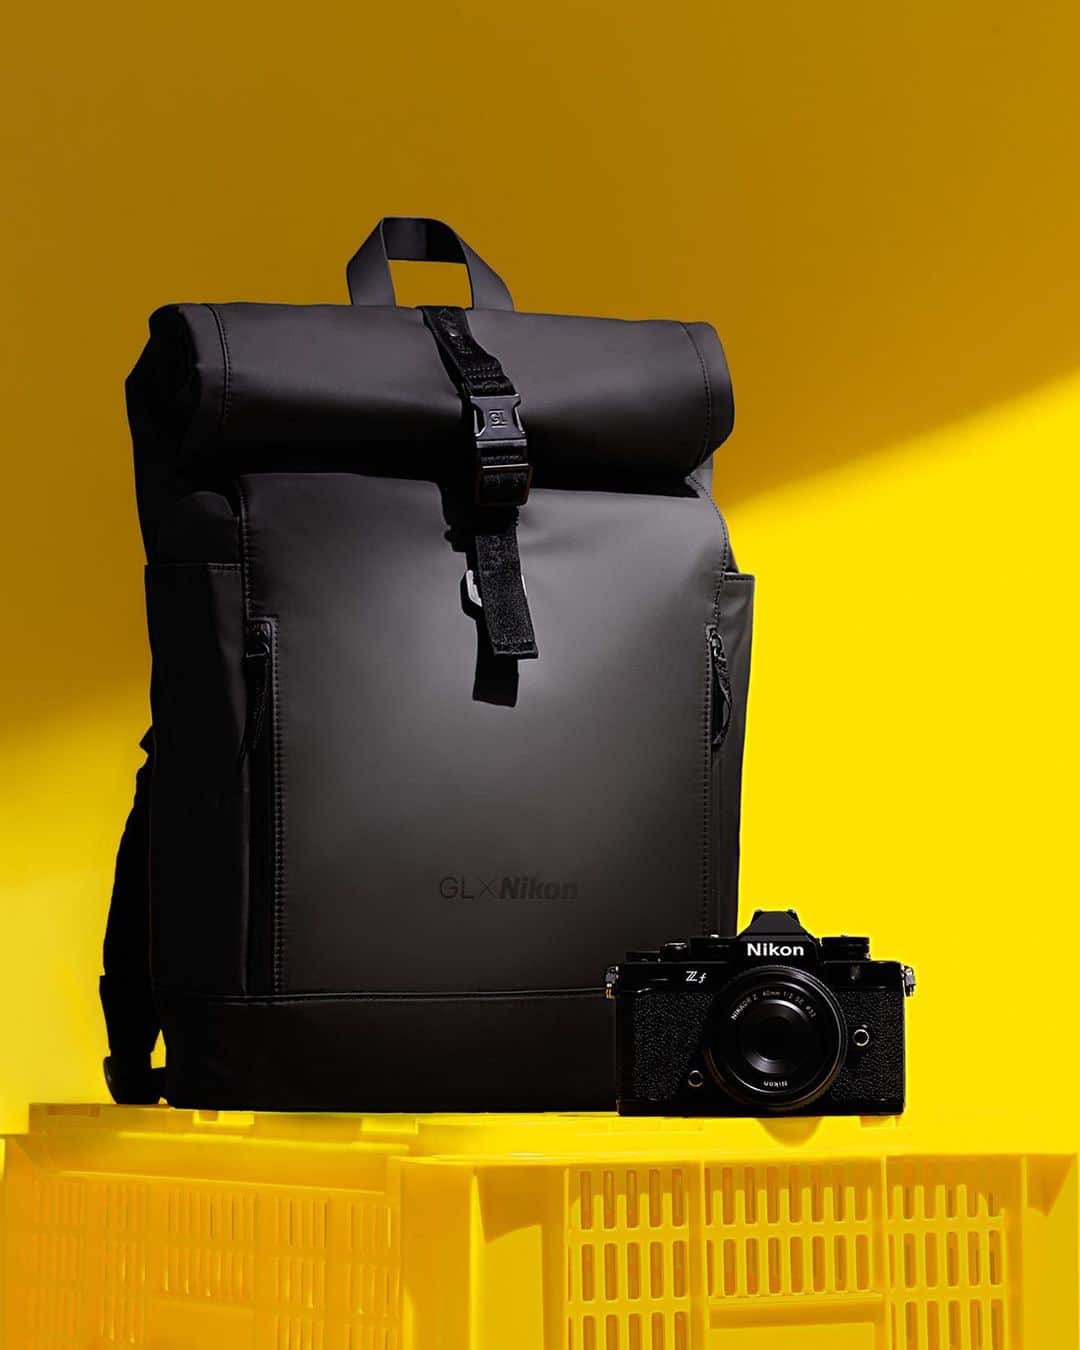 Nikon Australiaのインスタグラム：「When style meets function, icons are made. 🎒📸   To celebrate the launch of Nikon Z f, we’re announcing our second collaboration with @gastonluga for the new GL x Nikon backpack. Designed for comfort and performance with an all-black aesthetic, it’s the perfect pairing with your equipment for content creators on the move.   Learn more via the link in our bio.    #NikonZf #gastonluga #AnywhereWithGL #Nikon #Zf #MyNikonLife #NikonCreator」